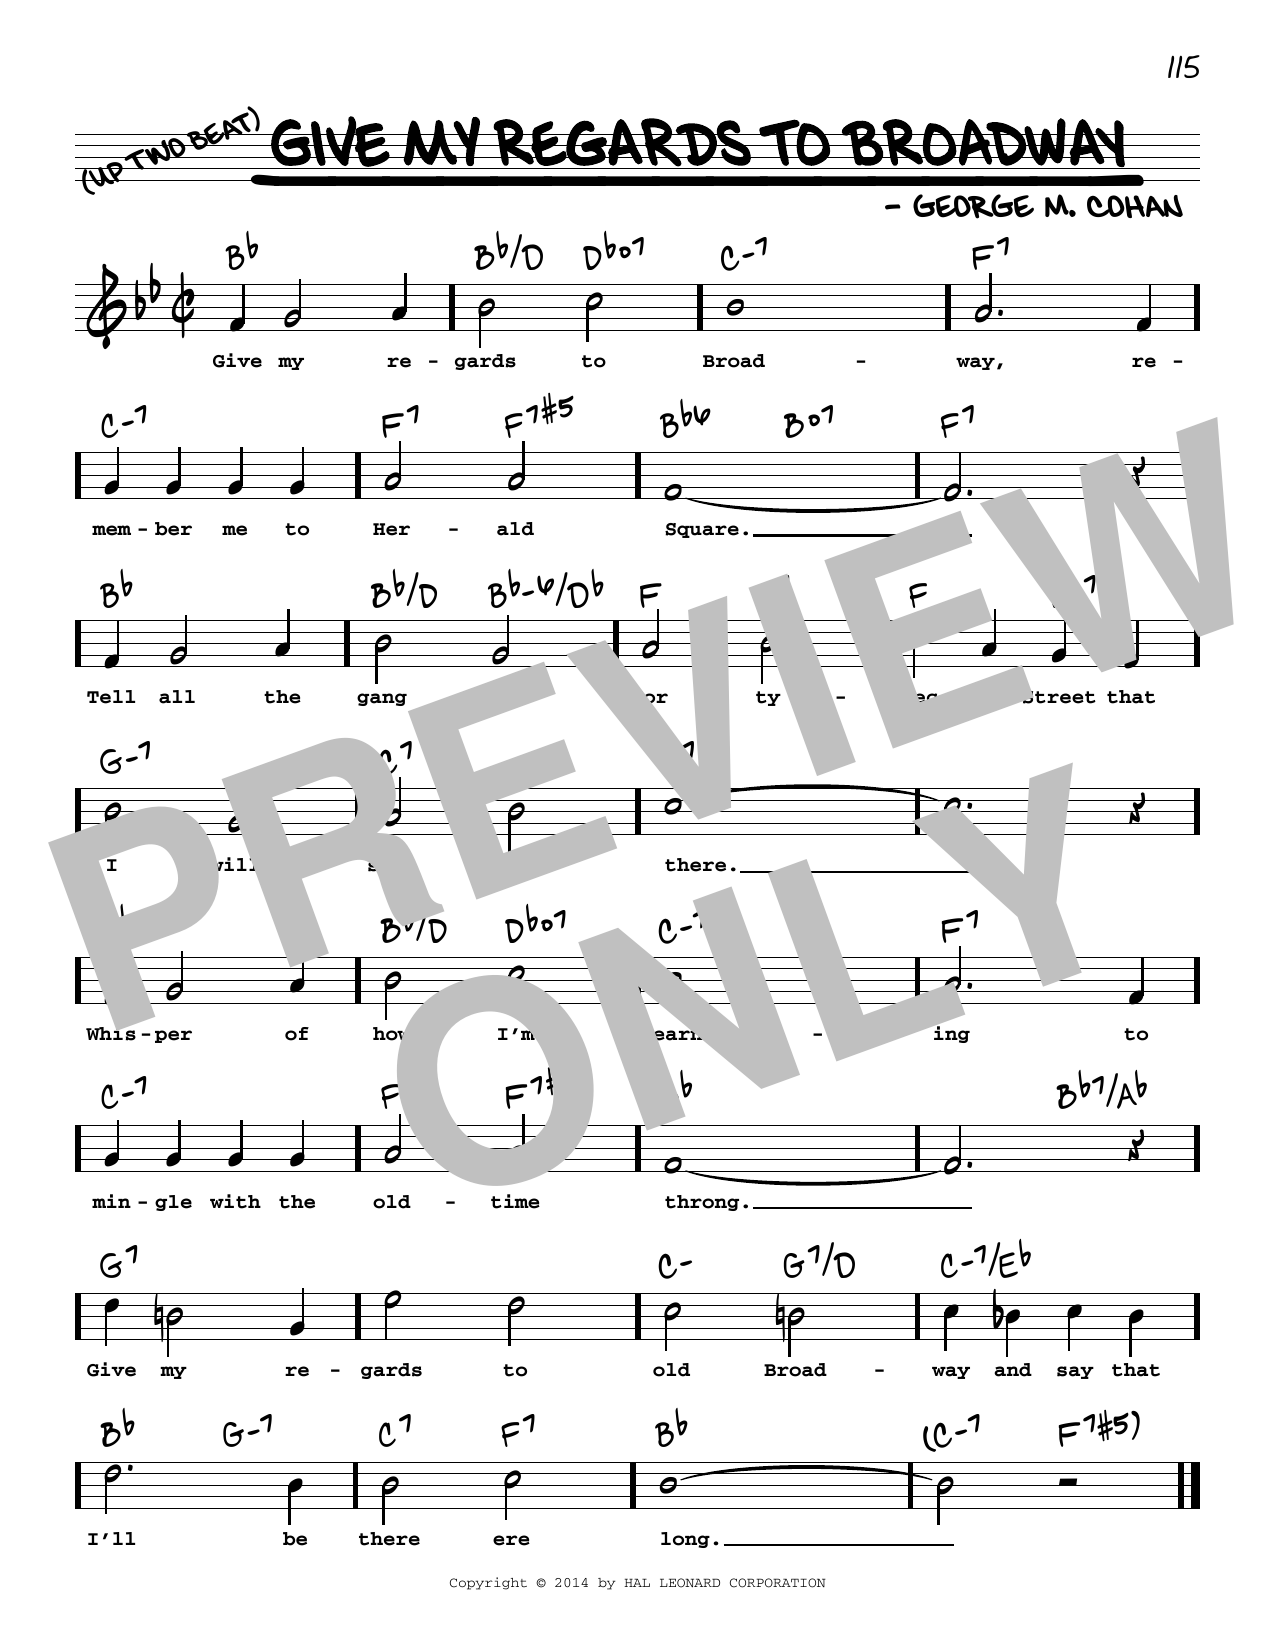 Download George M. Cohan Give My Regards To Broadway (High Voice Sheet Music